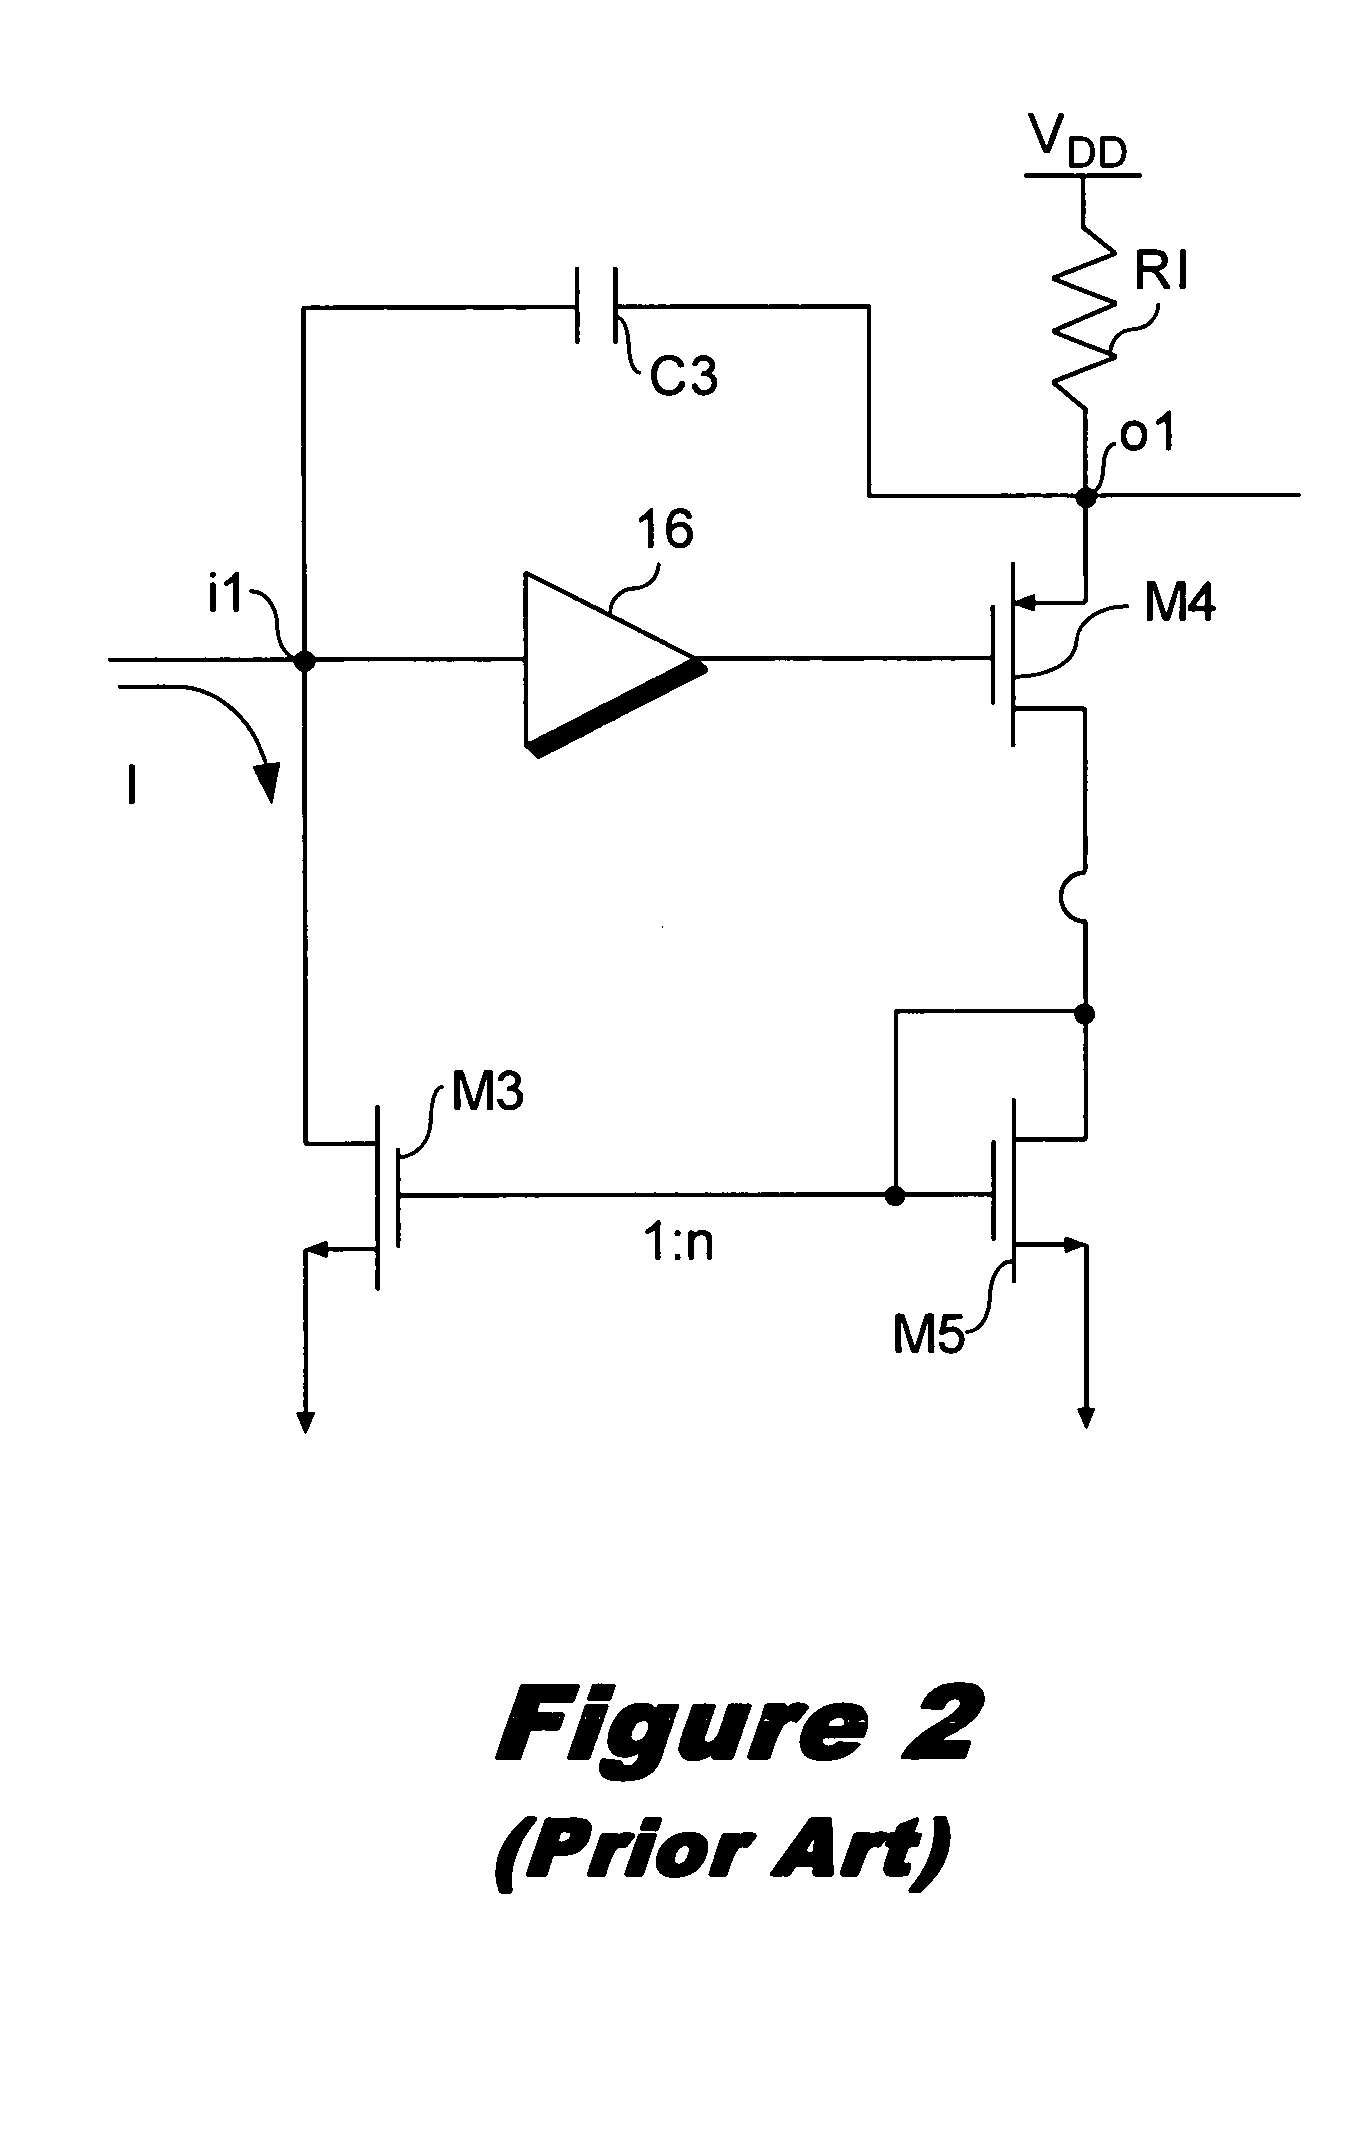 Method and apparatus for linear low-frequency feedback in monolithic low-noise charge amplifiers